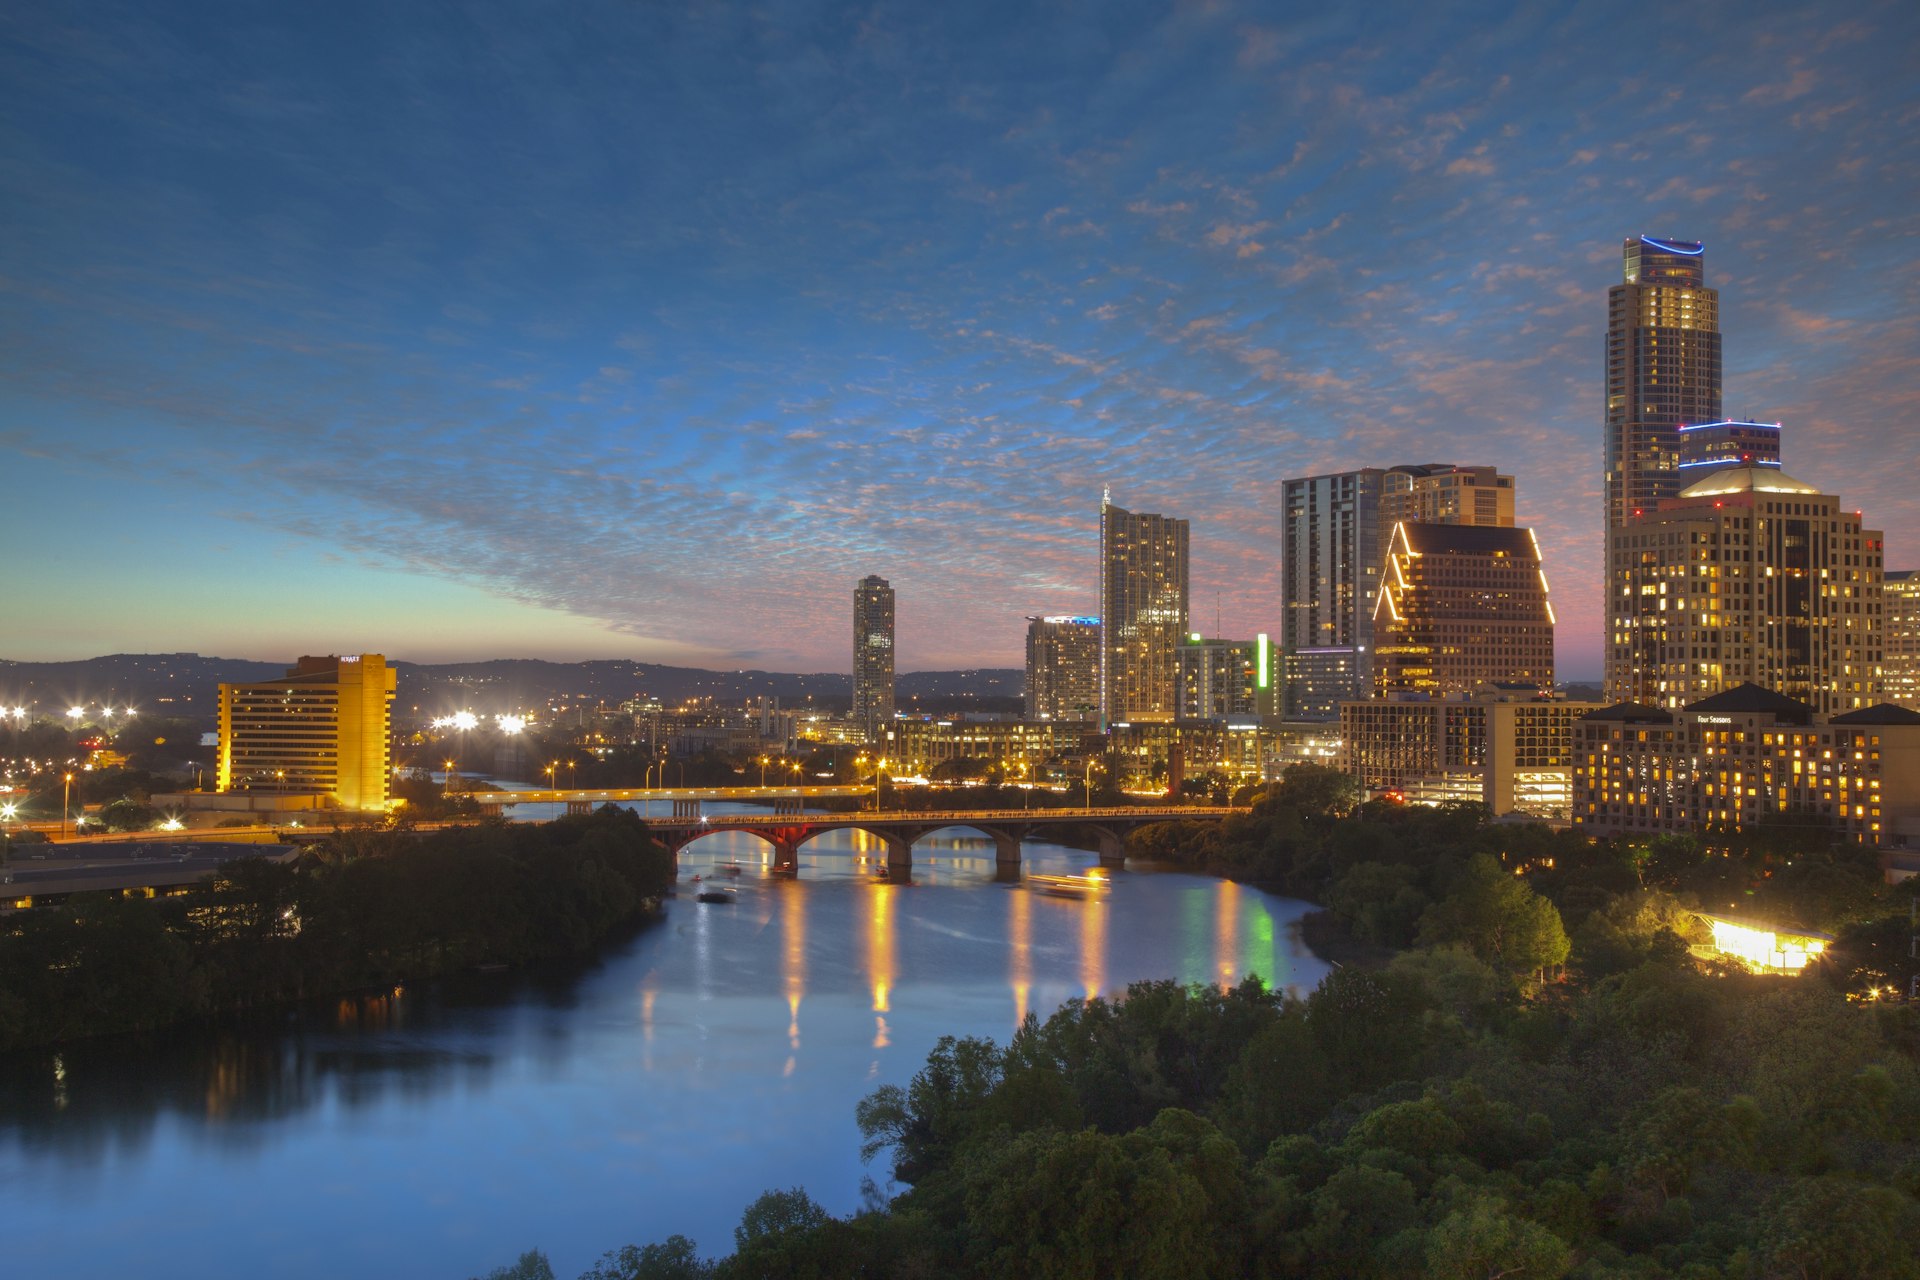 500px Photo ID: 95265045 - The Austin skyline on a wonderful April Evening rises above Lady Bird Lake and Zilker Park. Congress Bridge spans the river and connects the SoCo area with downtown.